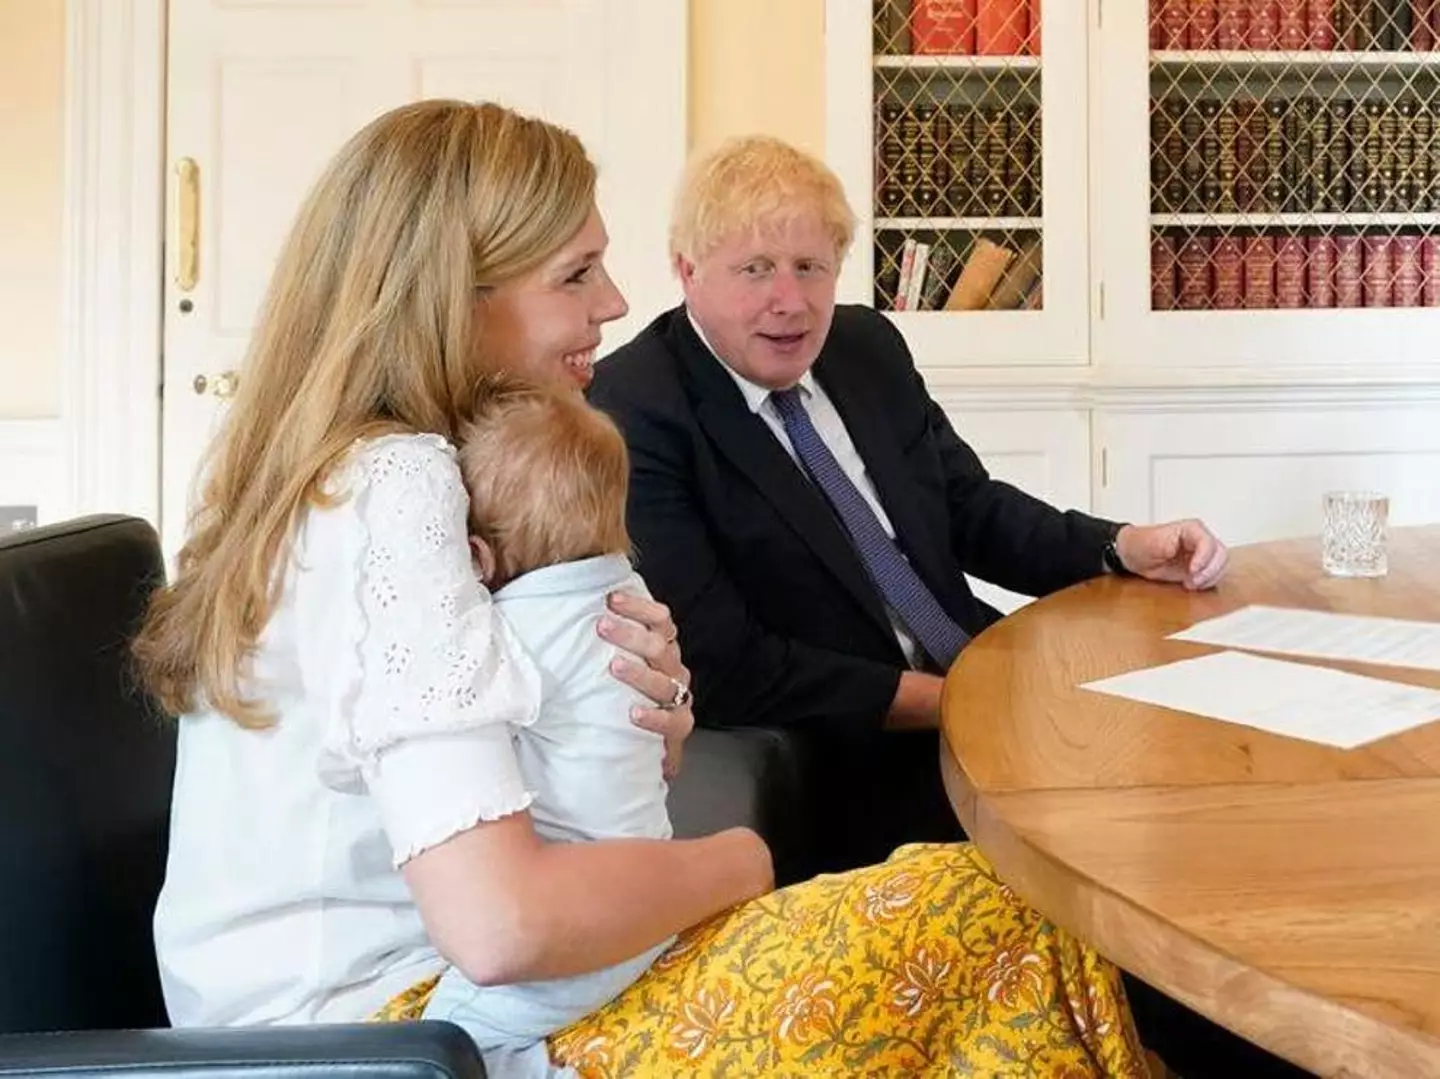 Boris Johnson welcomed son Wilfred earlier this year (